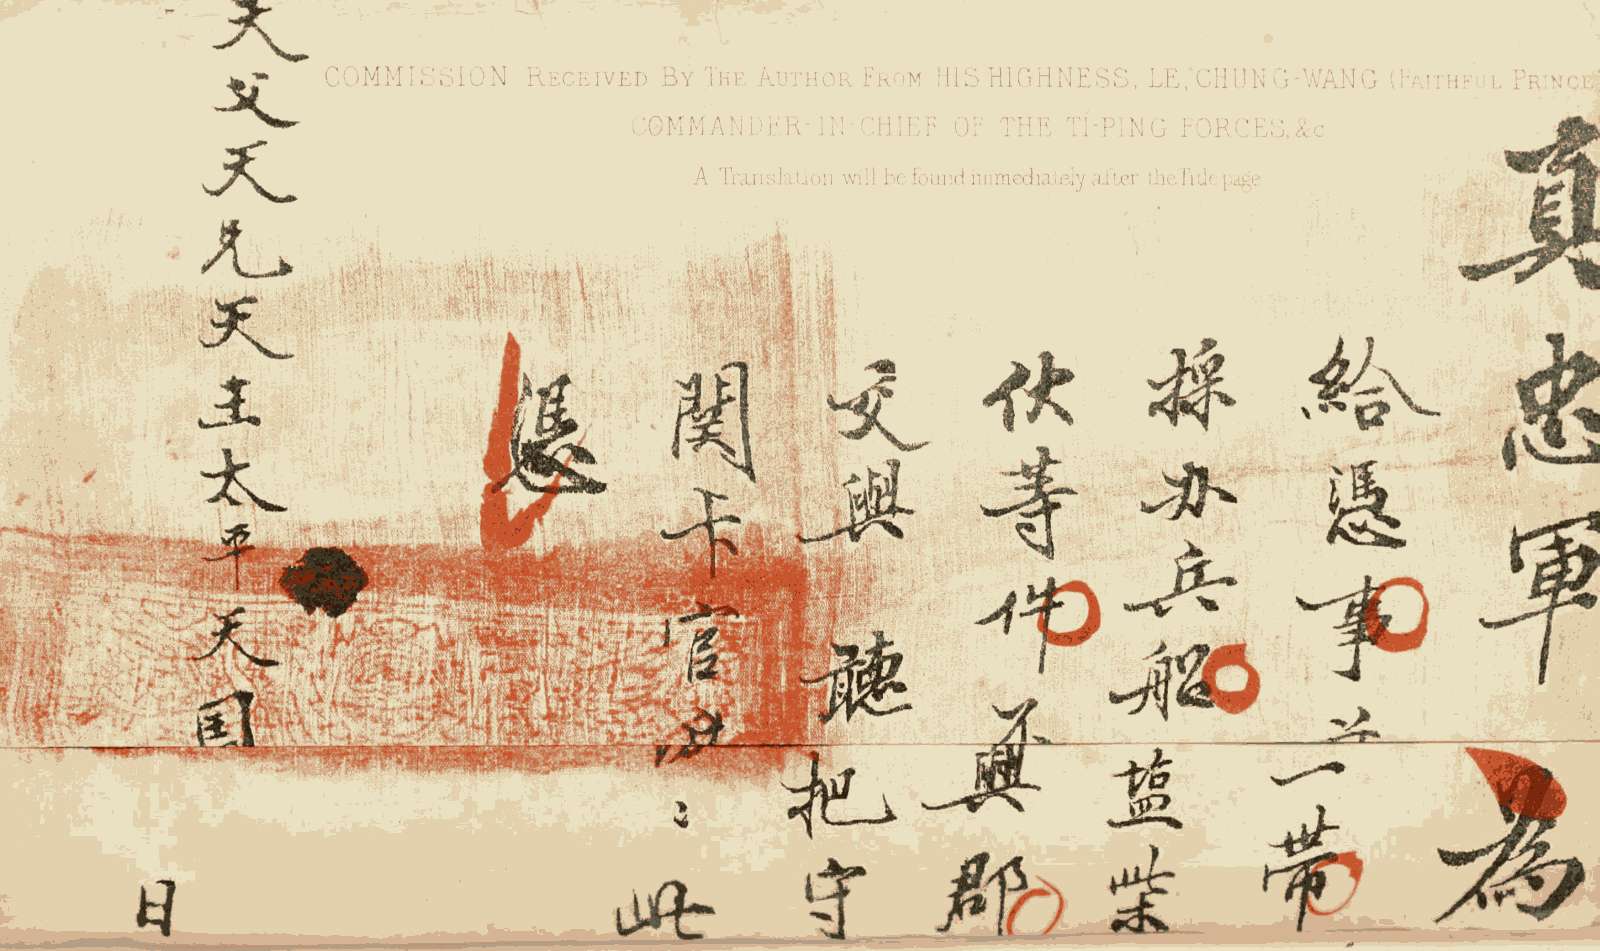 AI reads text from famously inscrutable ancient scroll for the first time